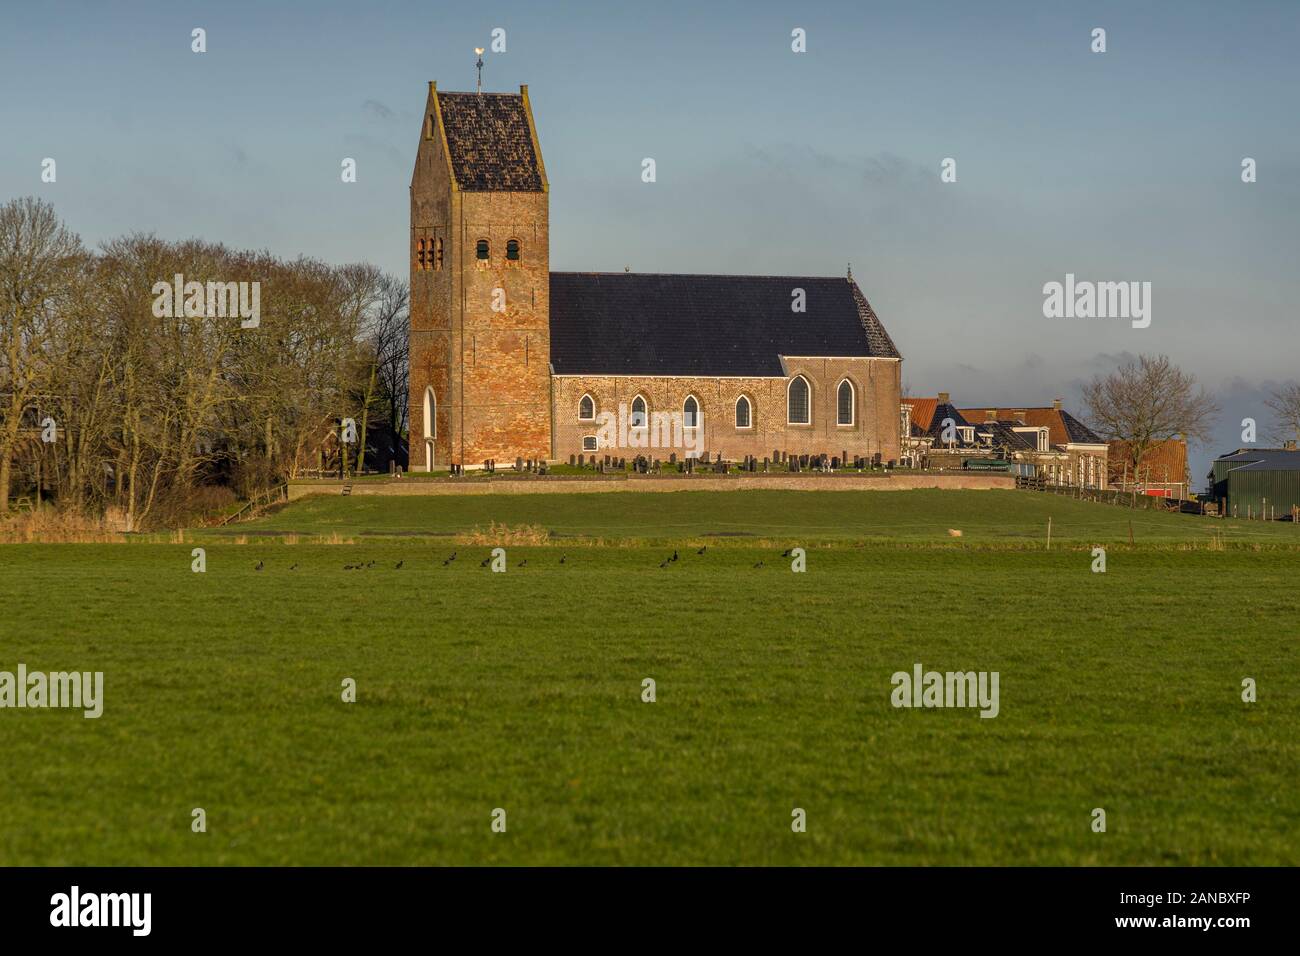 The Reformed Church, surrounded by a cemetery, in Wanswerd stands on a mound, The Netherlands 2019. Stock Photo